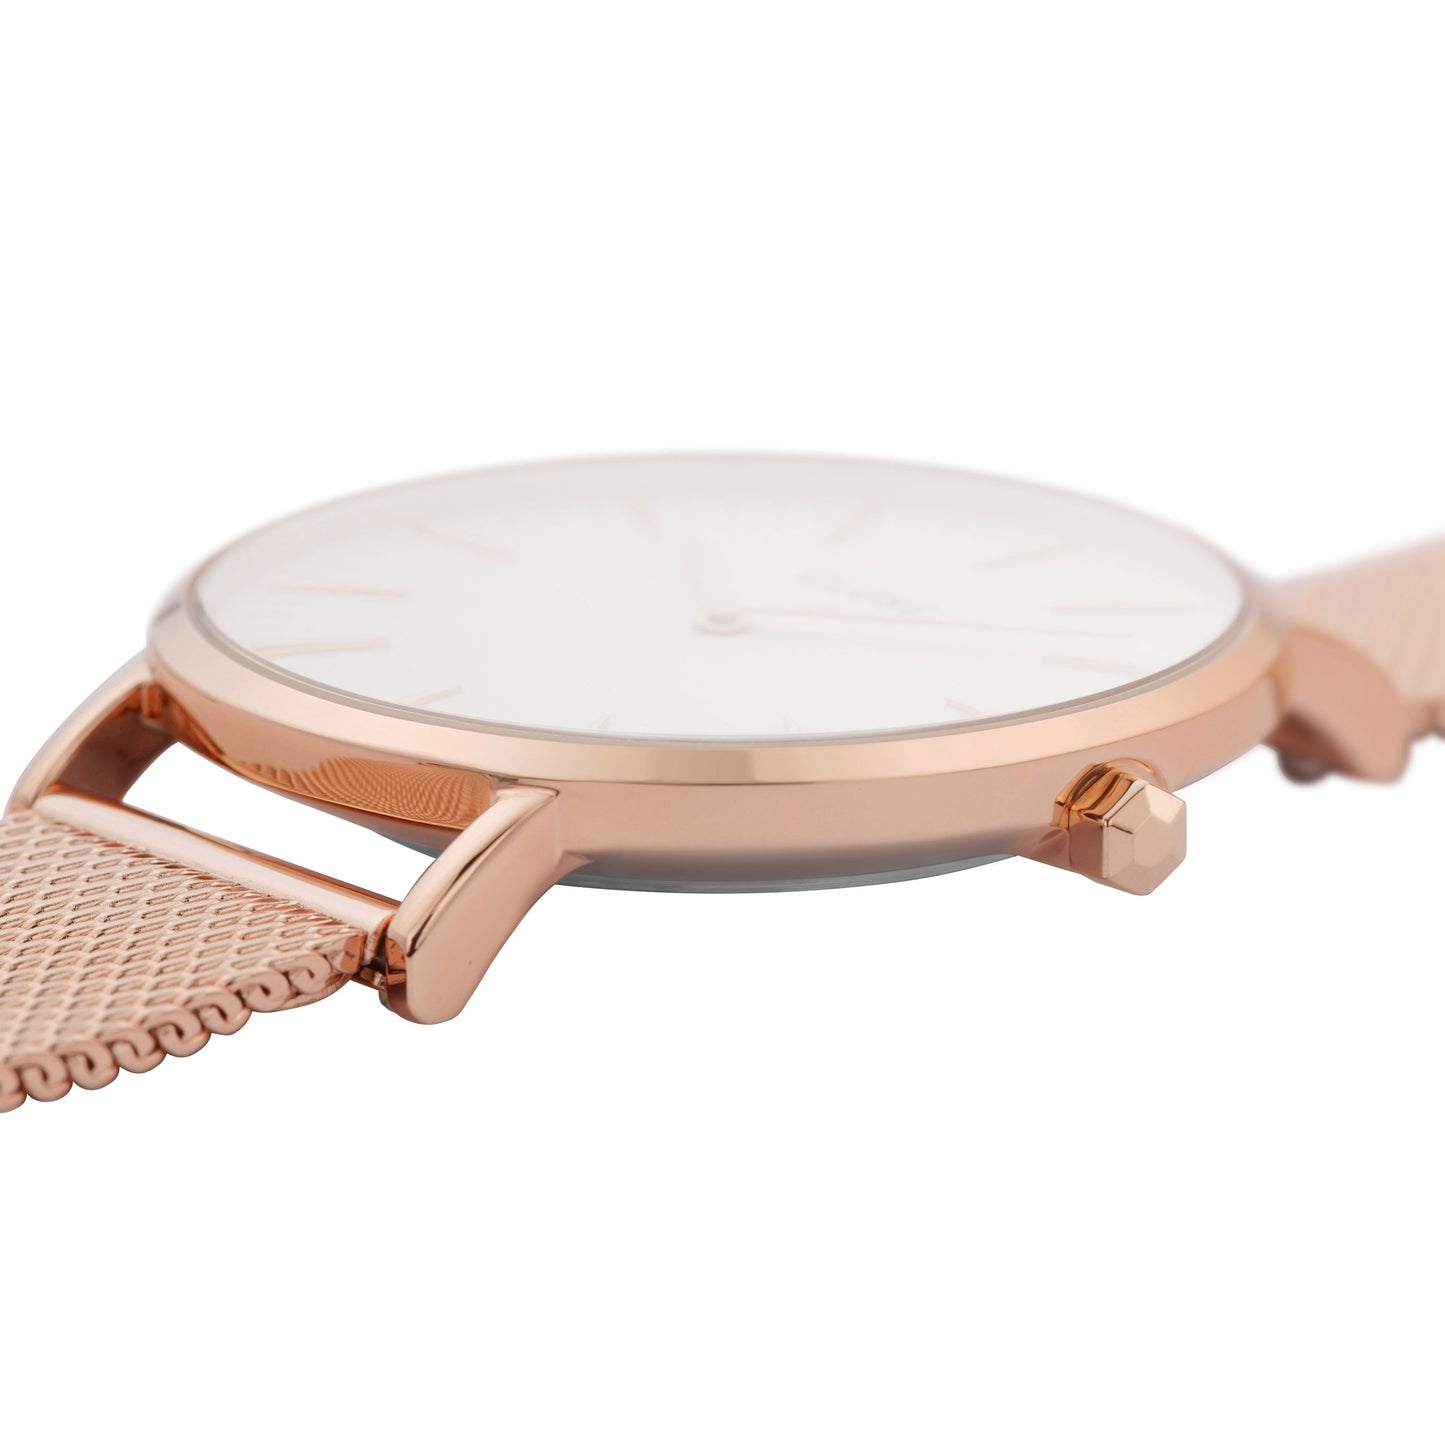 CLUSE ROSE GOLD BOHO CHIC WATCH